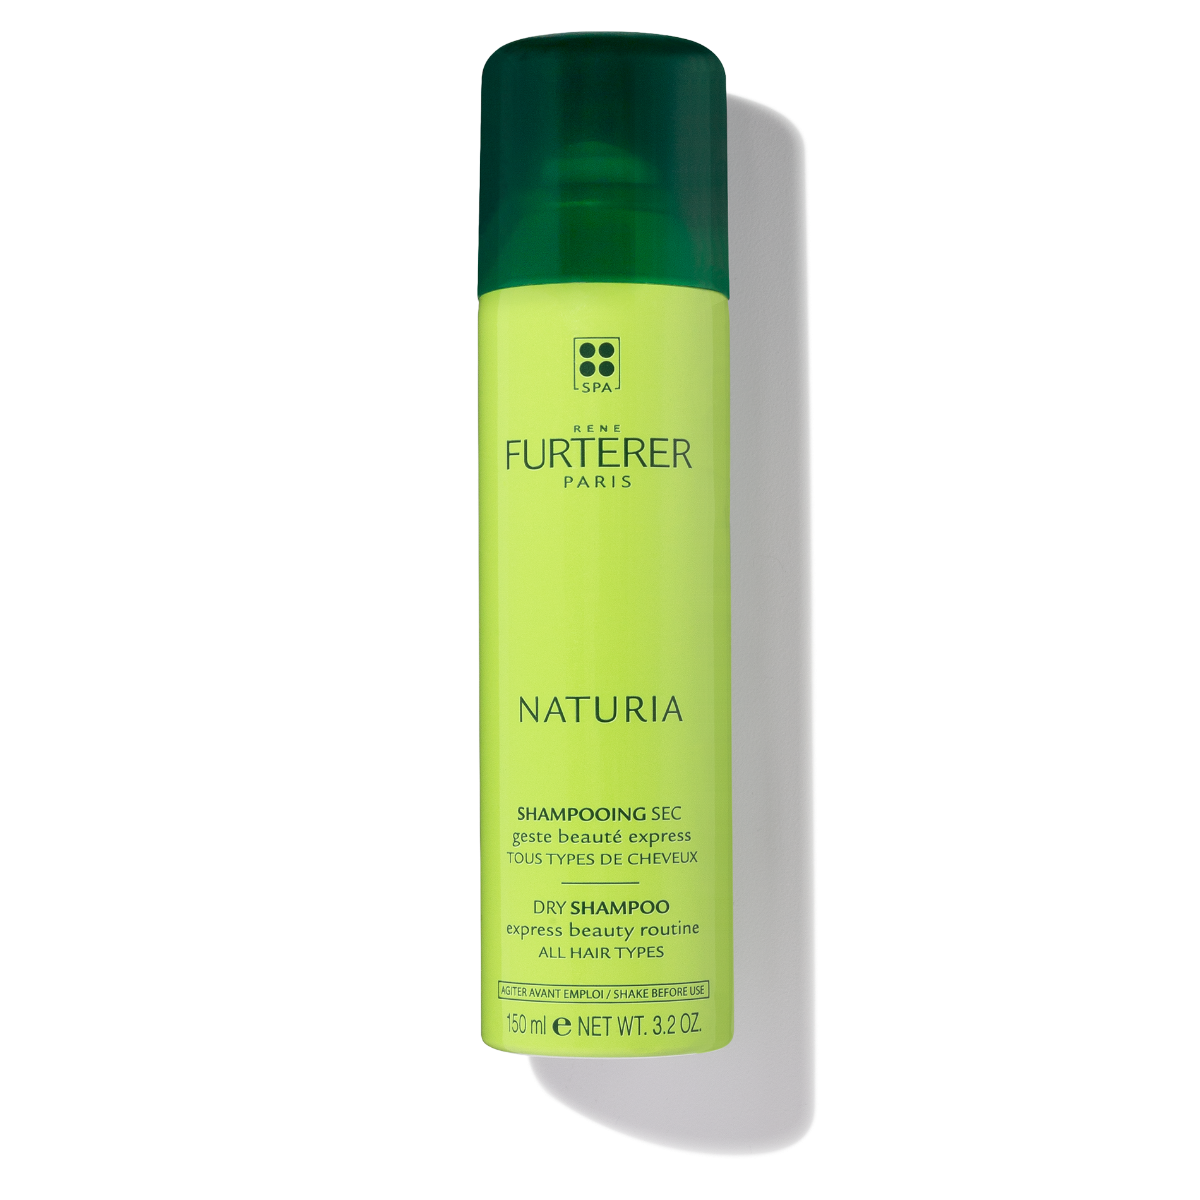 Rene Furterer NATURIA Dry Shampoo, Oil-Absorbing, Clay, Beige Tint, Lightly Scented 1.6 Ounce (Pack of 1)